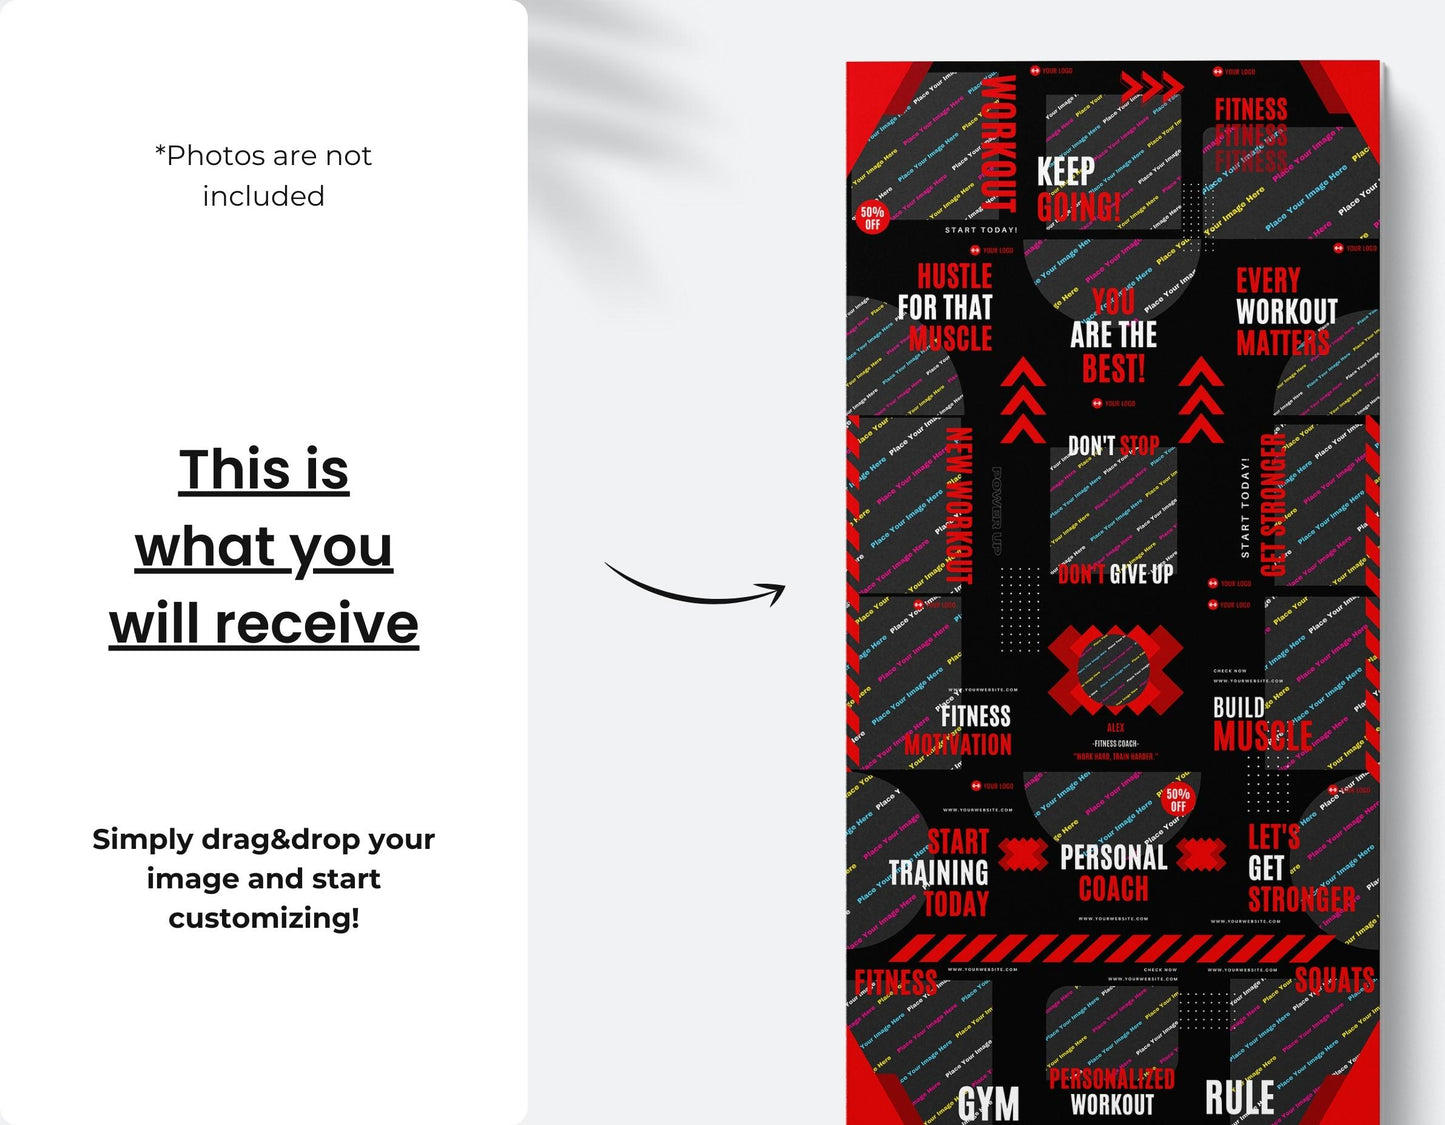 Fitness Brand Instagram Puzzle Template DigiPax